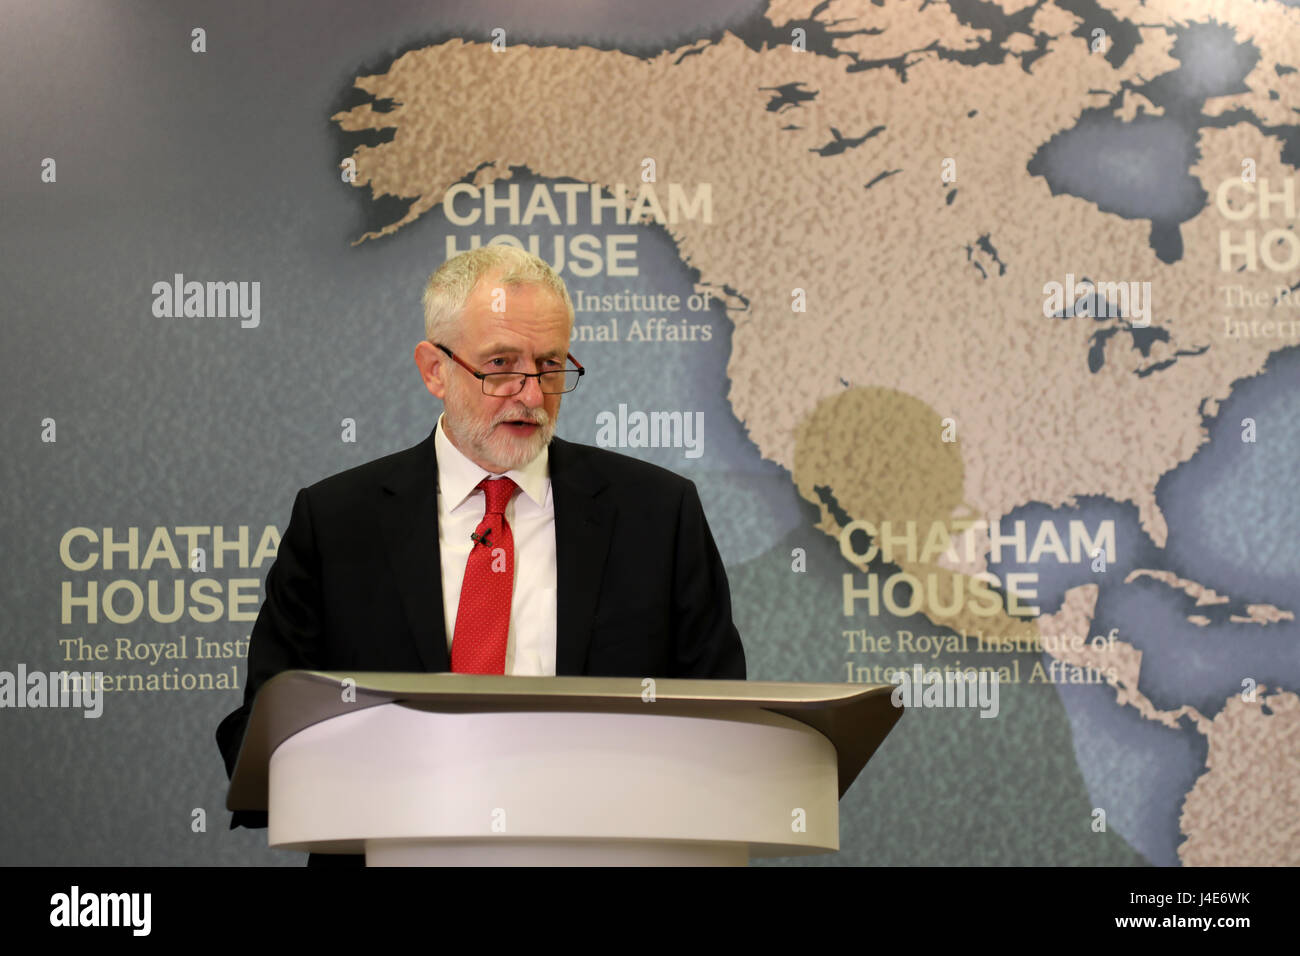 Chatham House, London, UK. 12th May, 2017. Jeremy Corbyn, leader of the Labour Party, gives a speech on his party’s foreign and defence policy at the Chatham House think-tank, during the 2017 UK general election campaign. Credit: Dominic Dudley/Alamy Live News Stock Photo